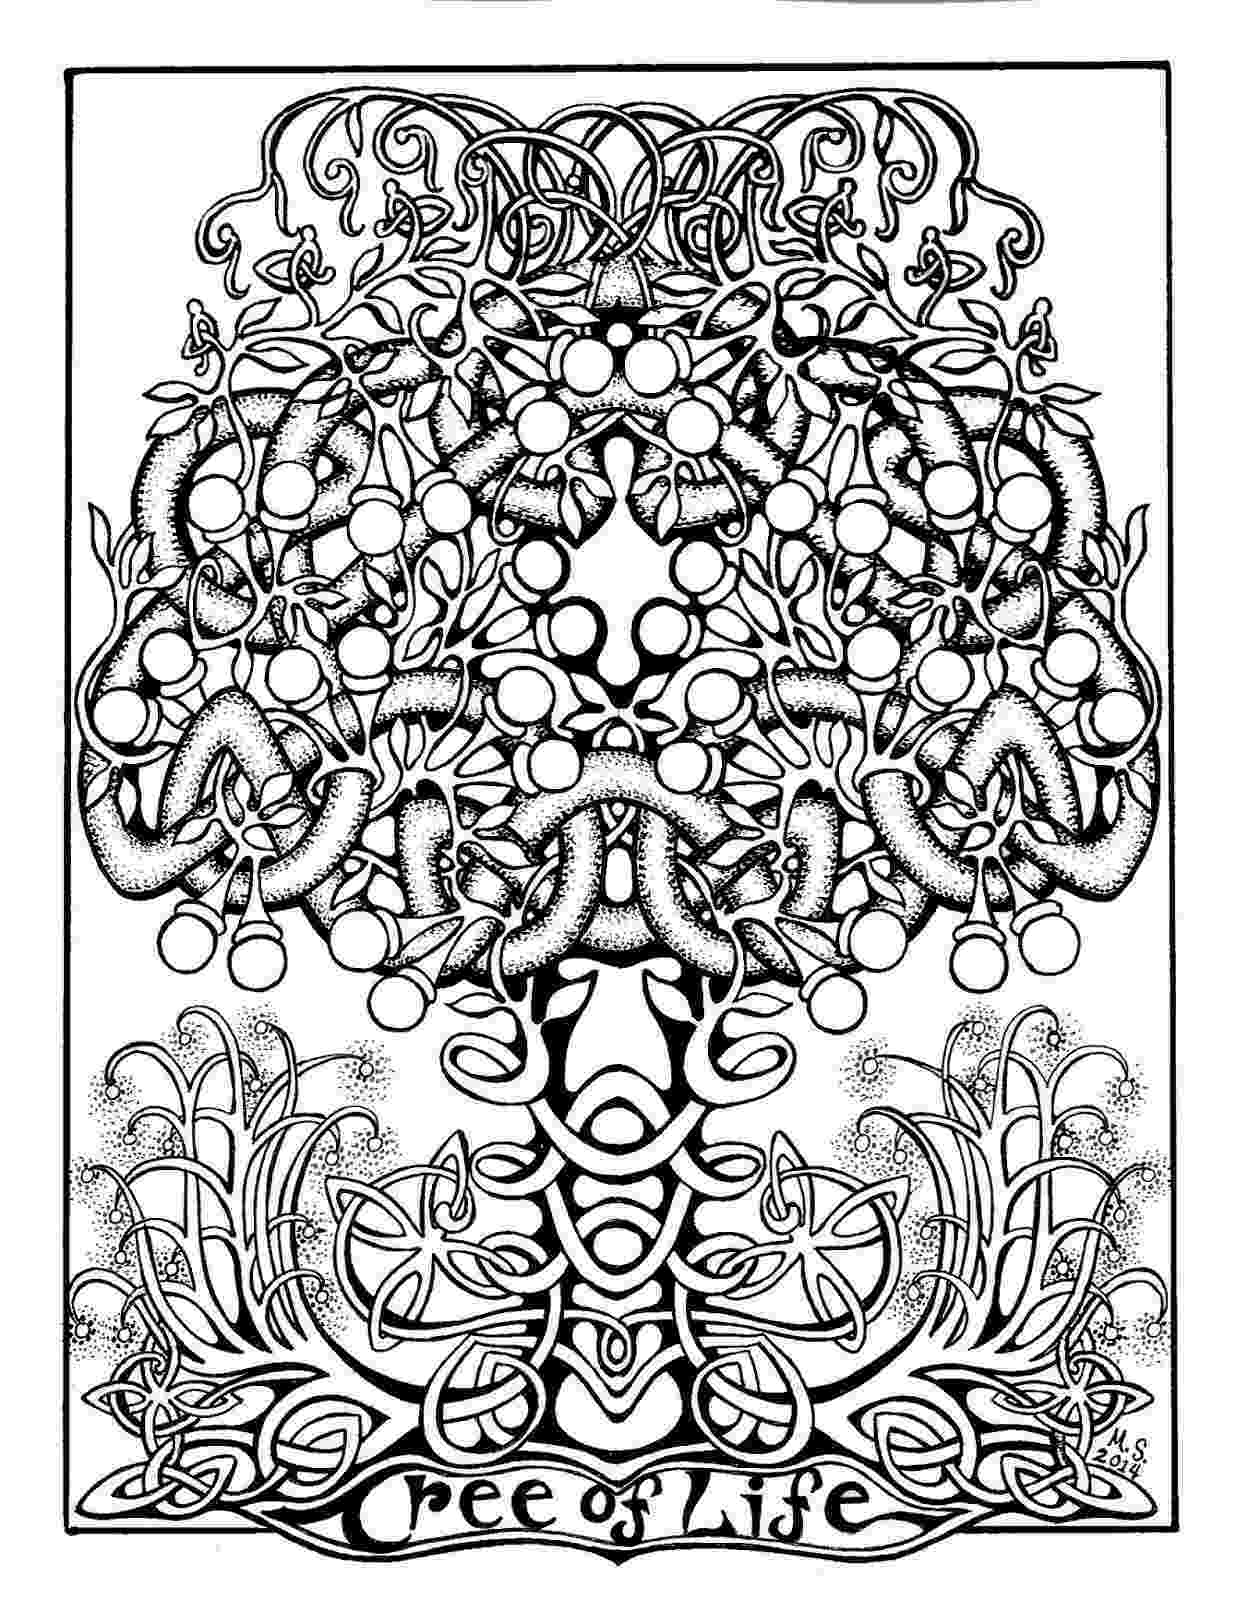 printable tree of life asterion39s occult art tree of life tree life of printable 